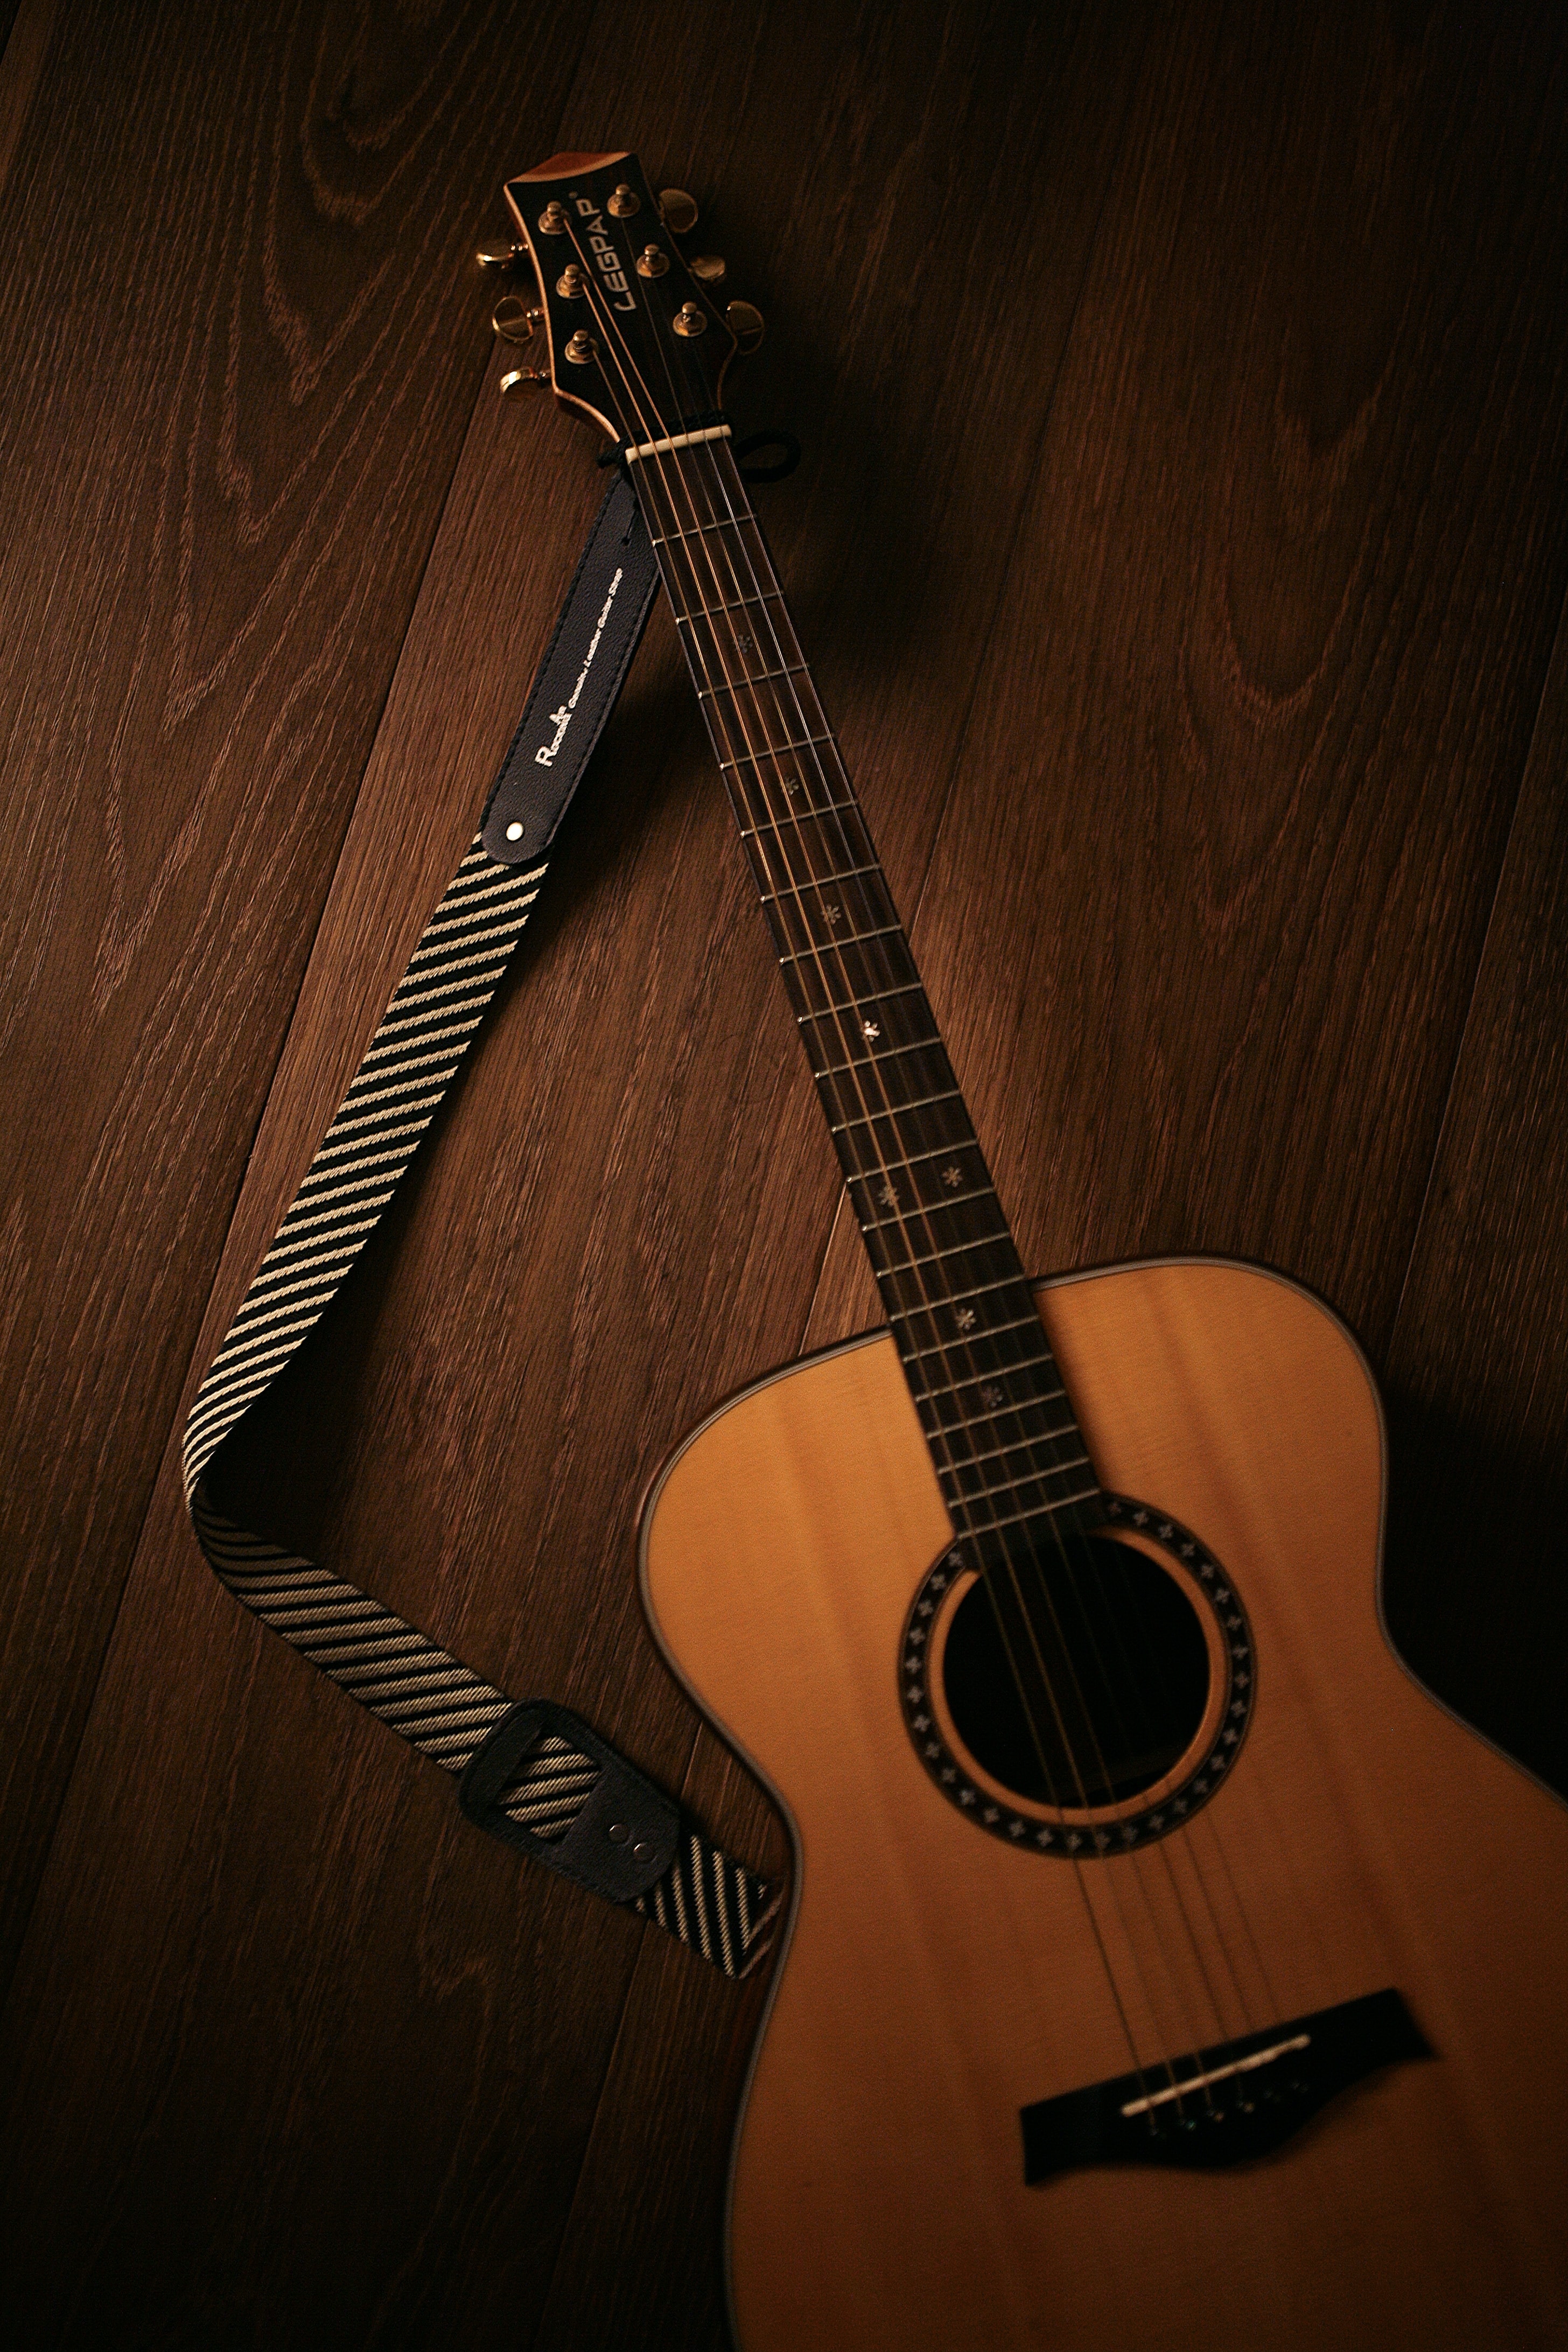 guitar, music, acoustic guitar, musical instrument, brown, wood, wooden Free Stock Photo